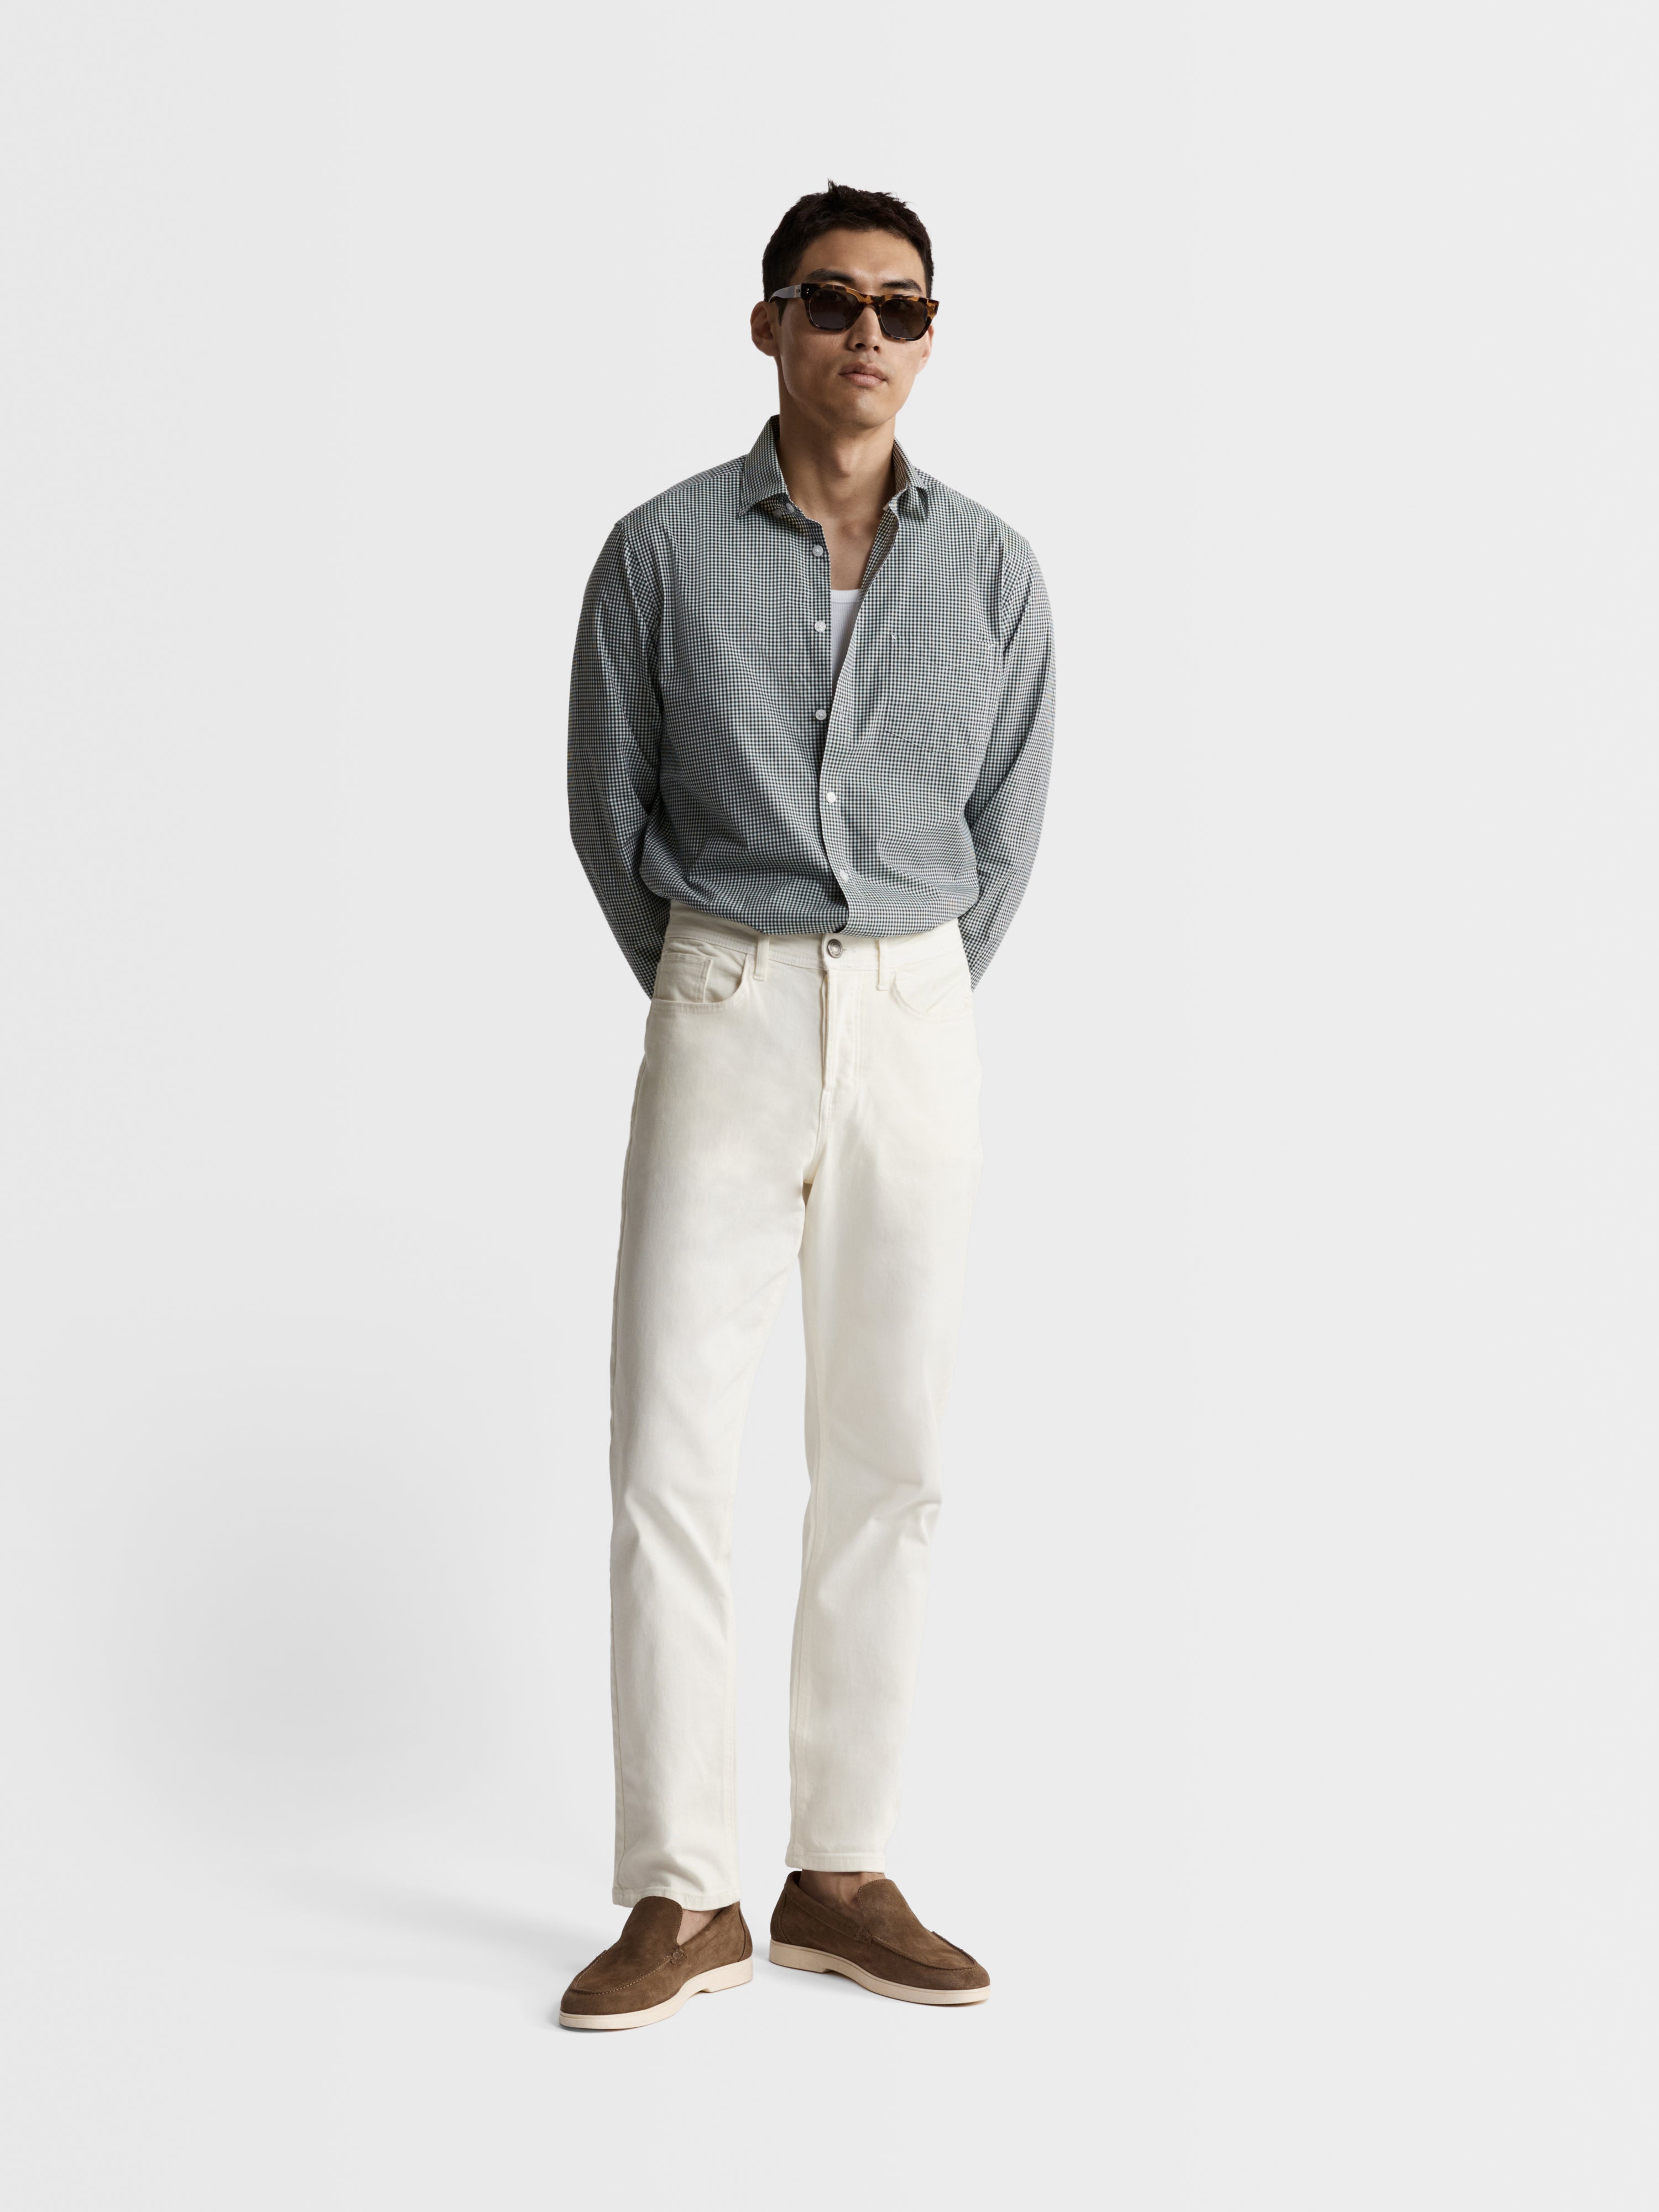 Timeless Classics: White Shirt Matching Pant Combination for a Sleek Look